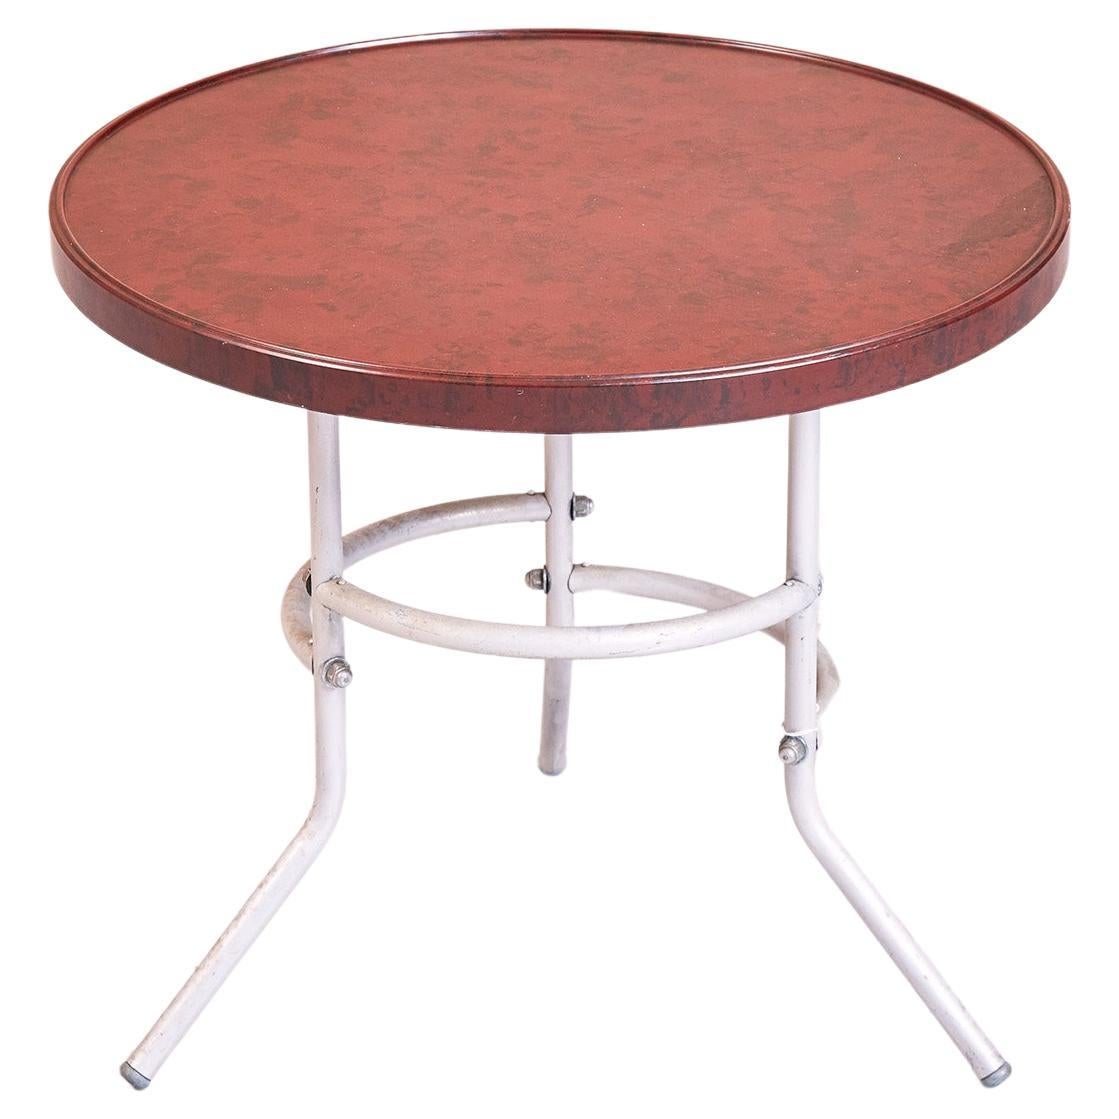 Modernist Mid-Century Round Bakelite Side Table by Mahbro, 1940s For Sale